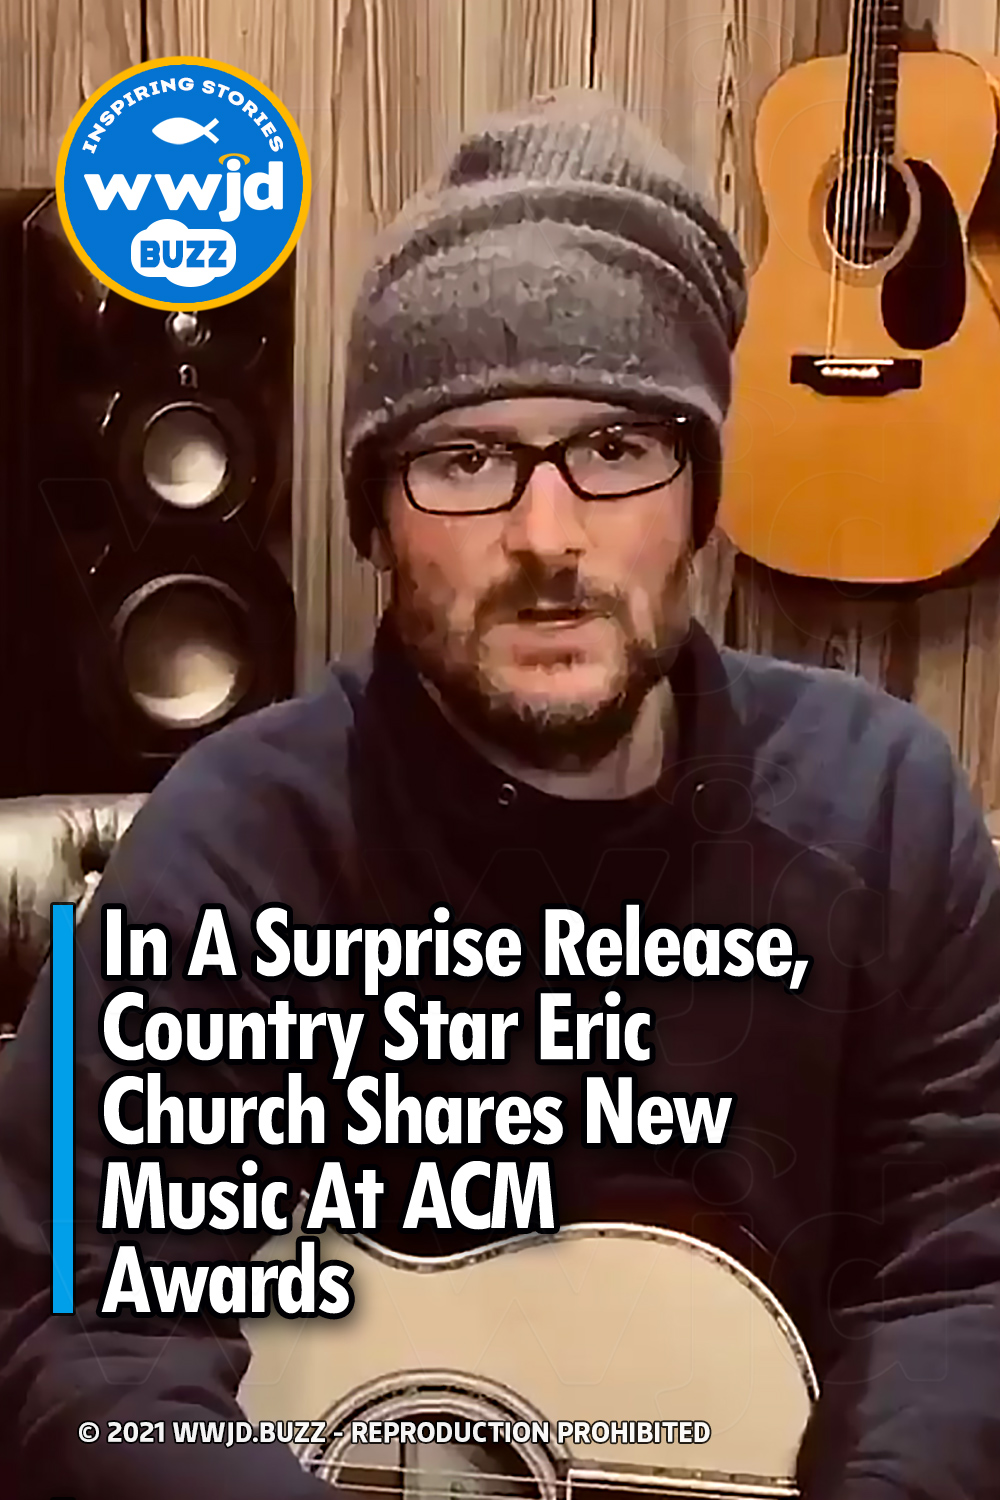 In A Surprise Release, Country Star Eric Church Shares New Music At ACM Awards